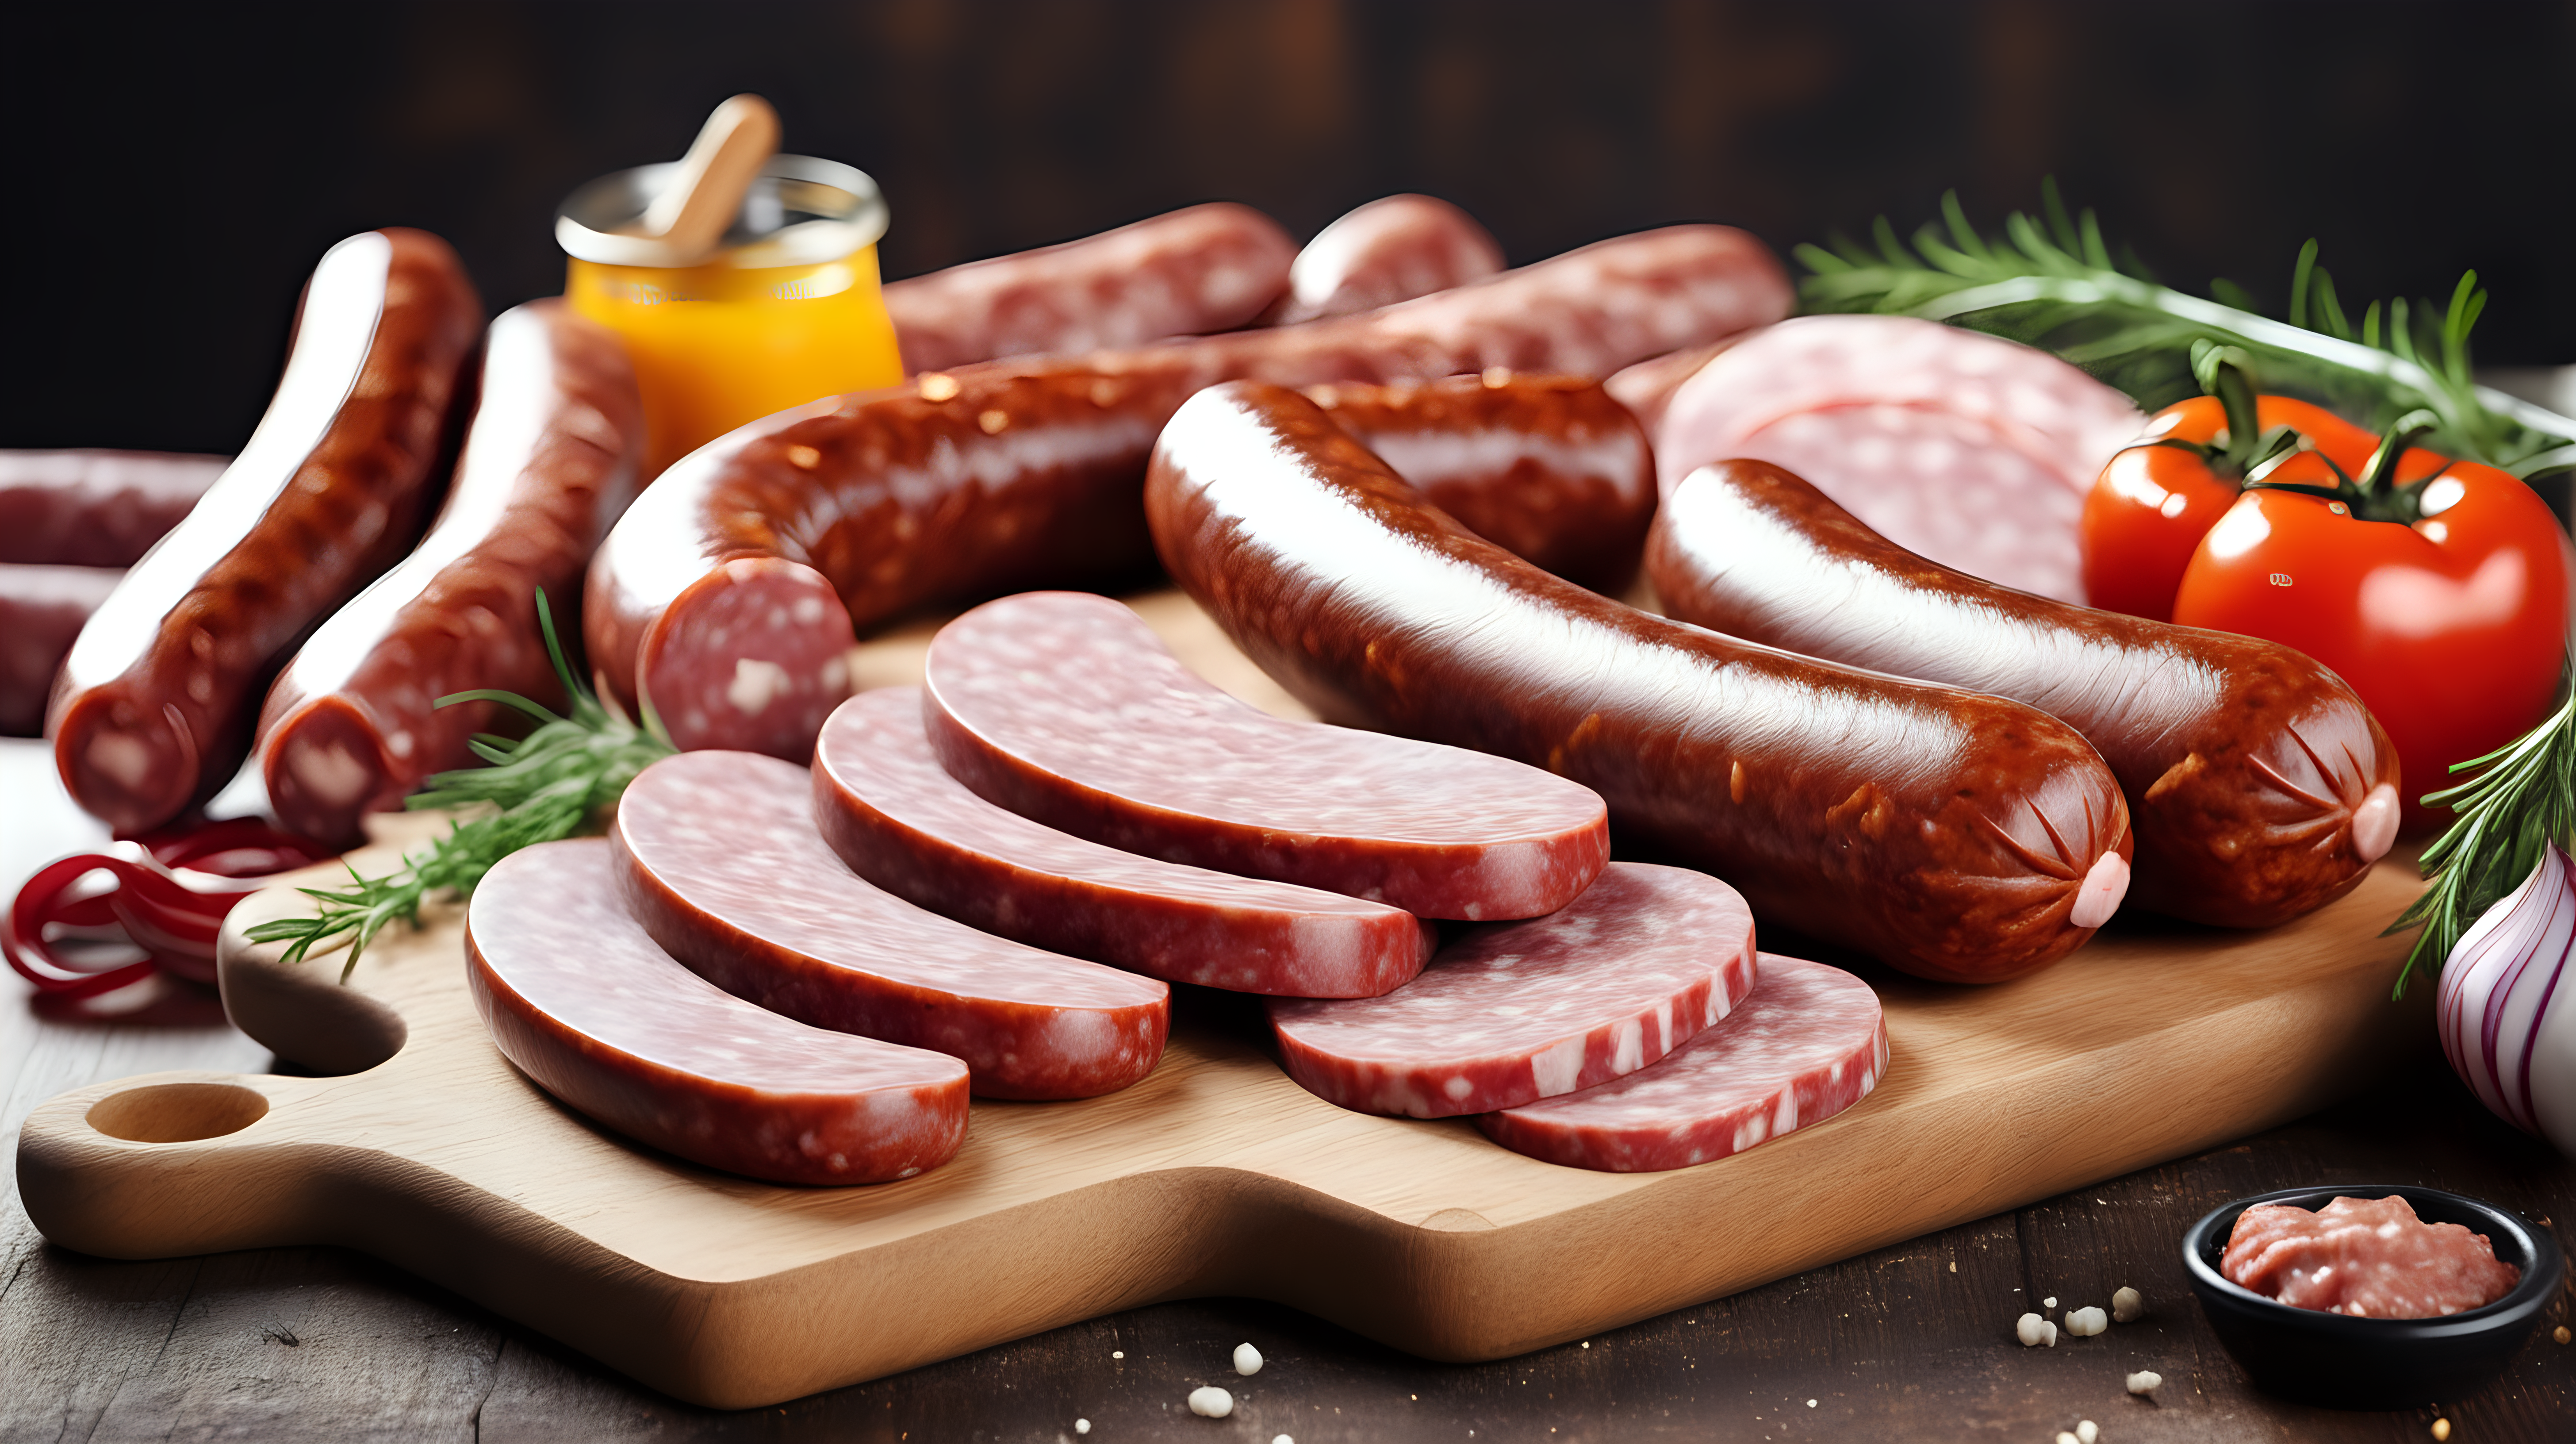 Variety of sausage products on cutting board copy